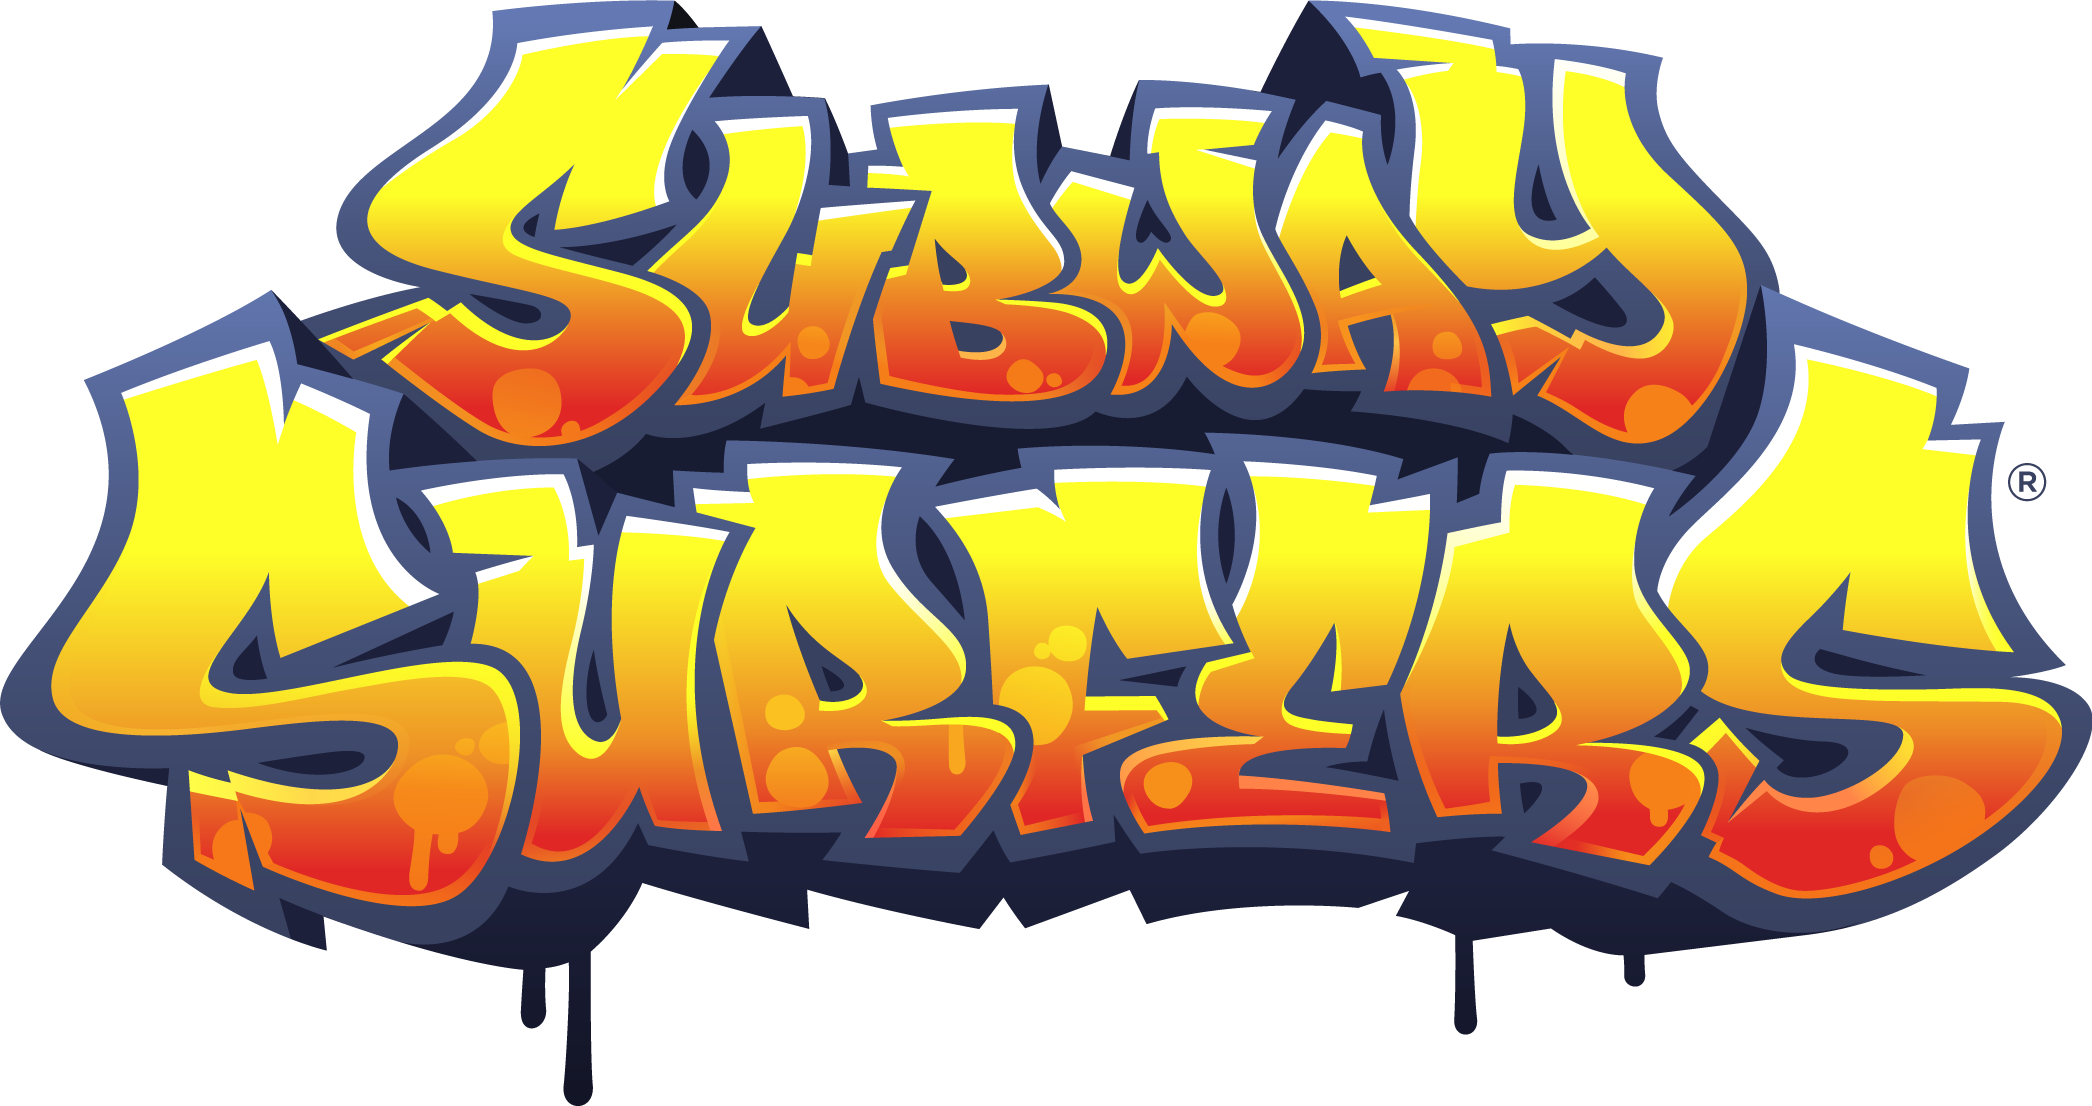 Subway Surfers Font: Download Free Font Now